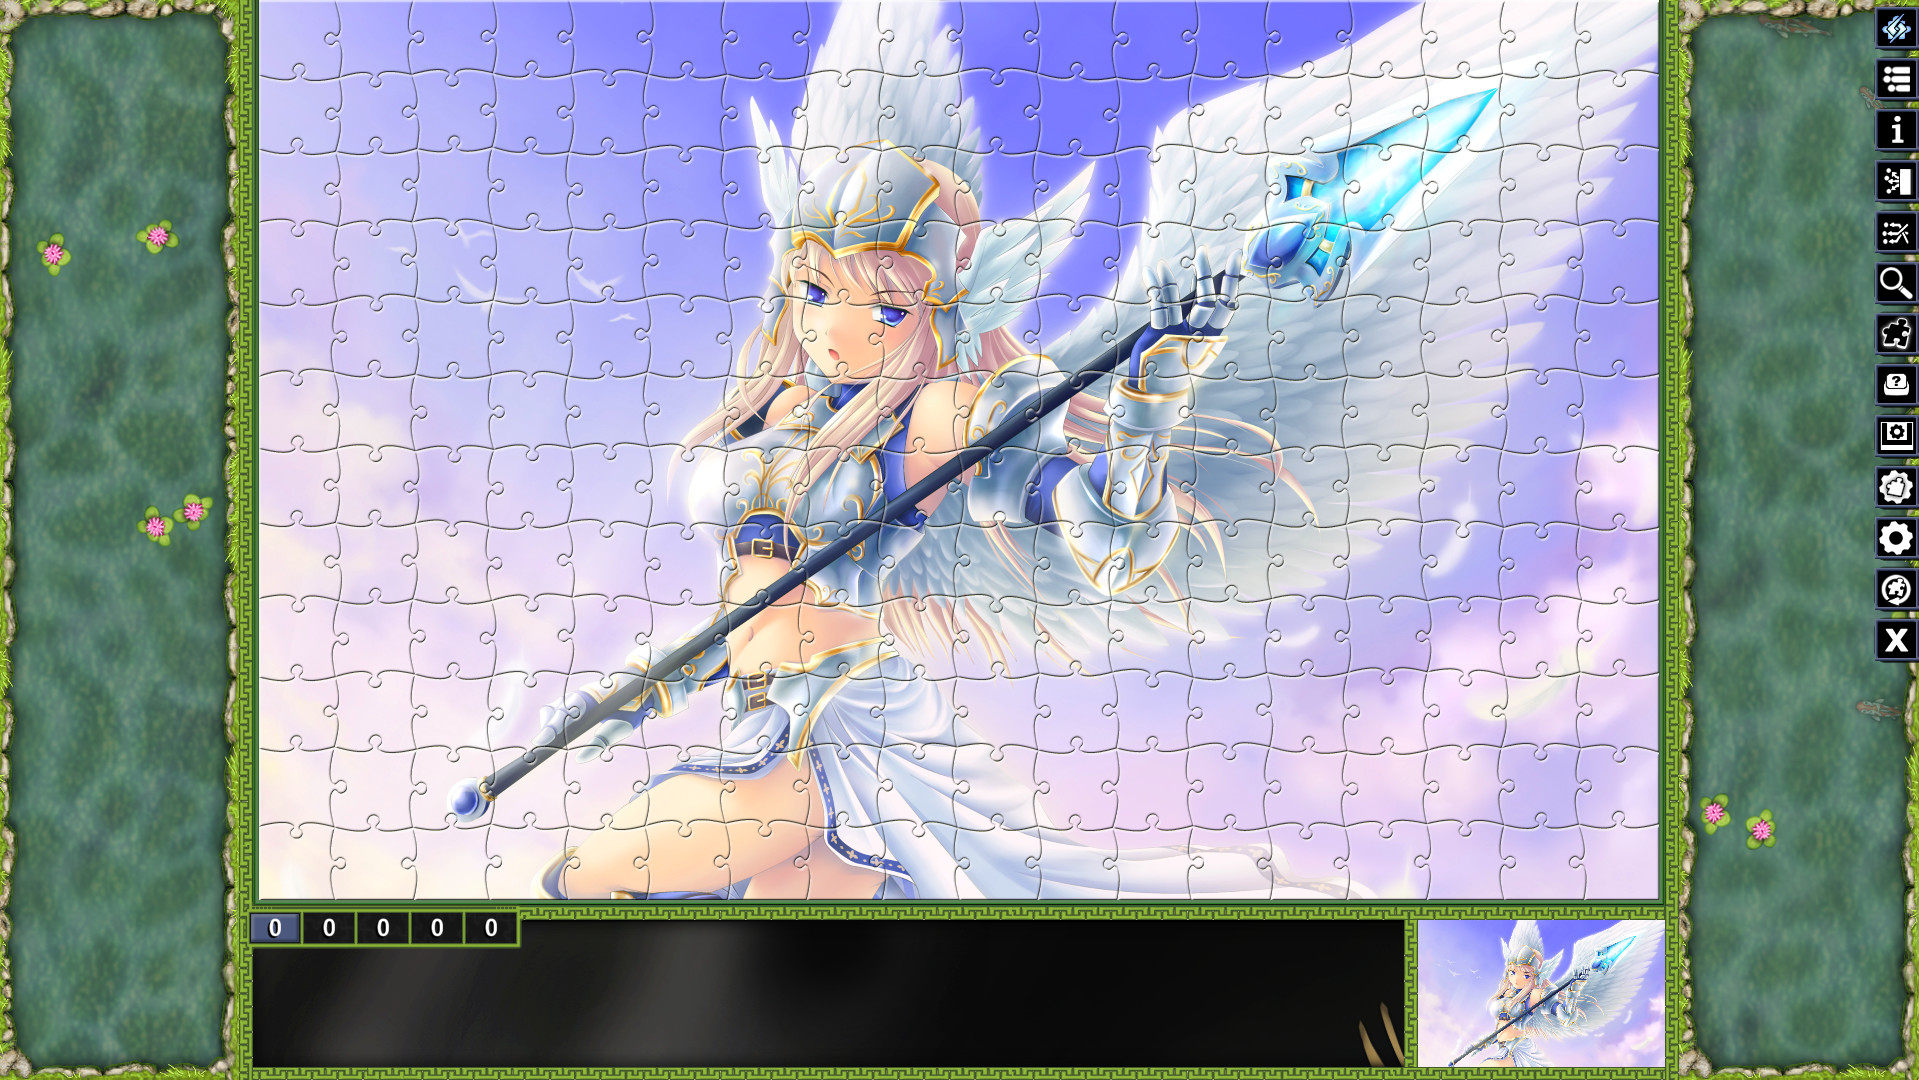 Pixel Puzzles Illustrations & Anime - Jigsaw Pack: Angels Featured Screenshot #1